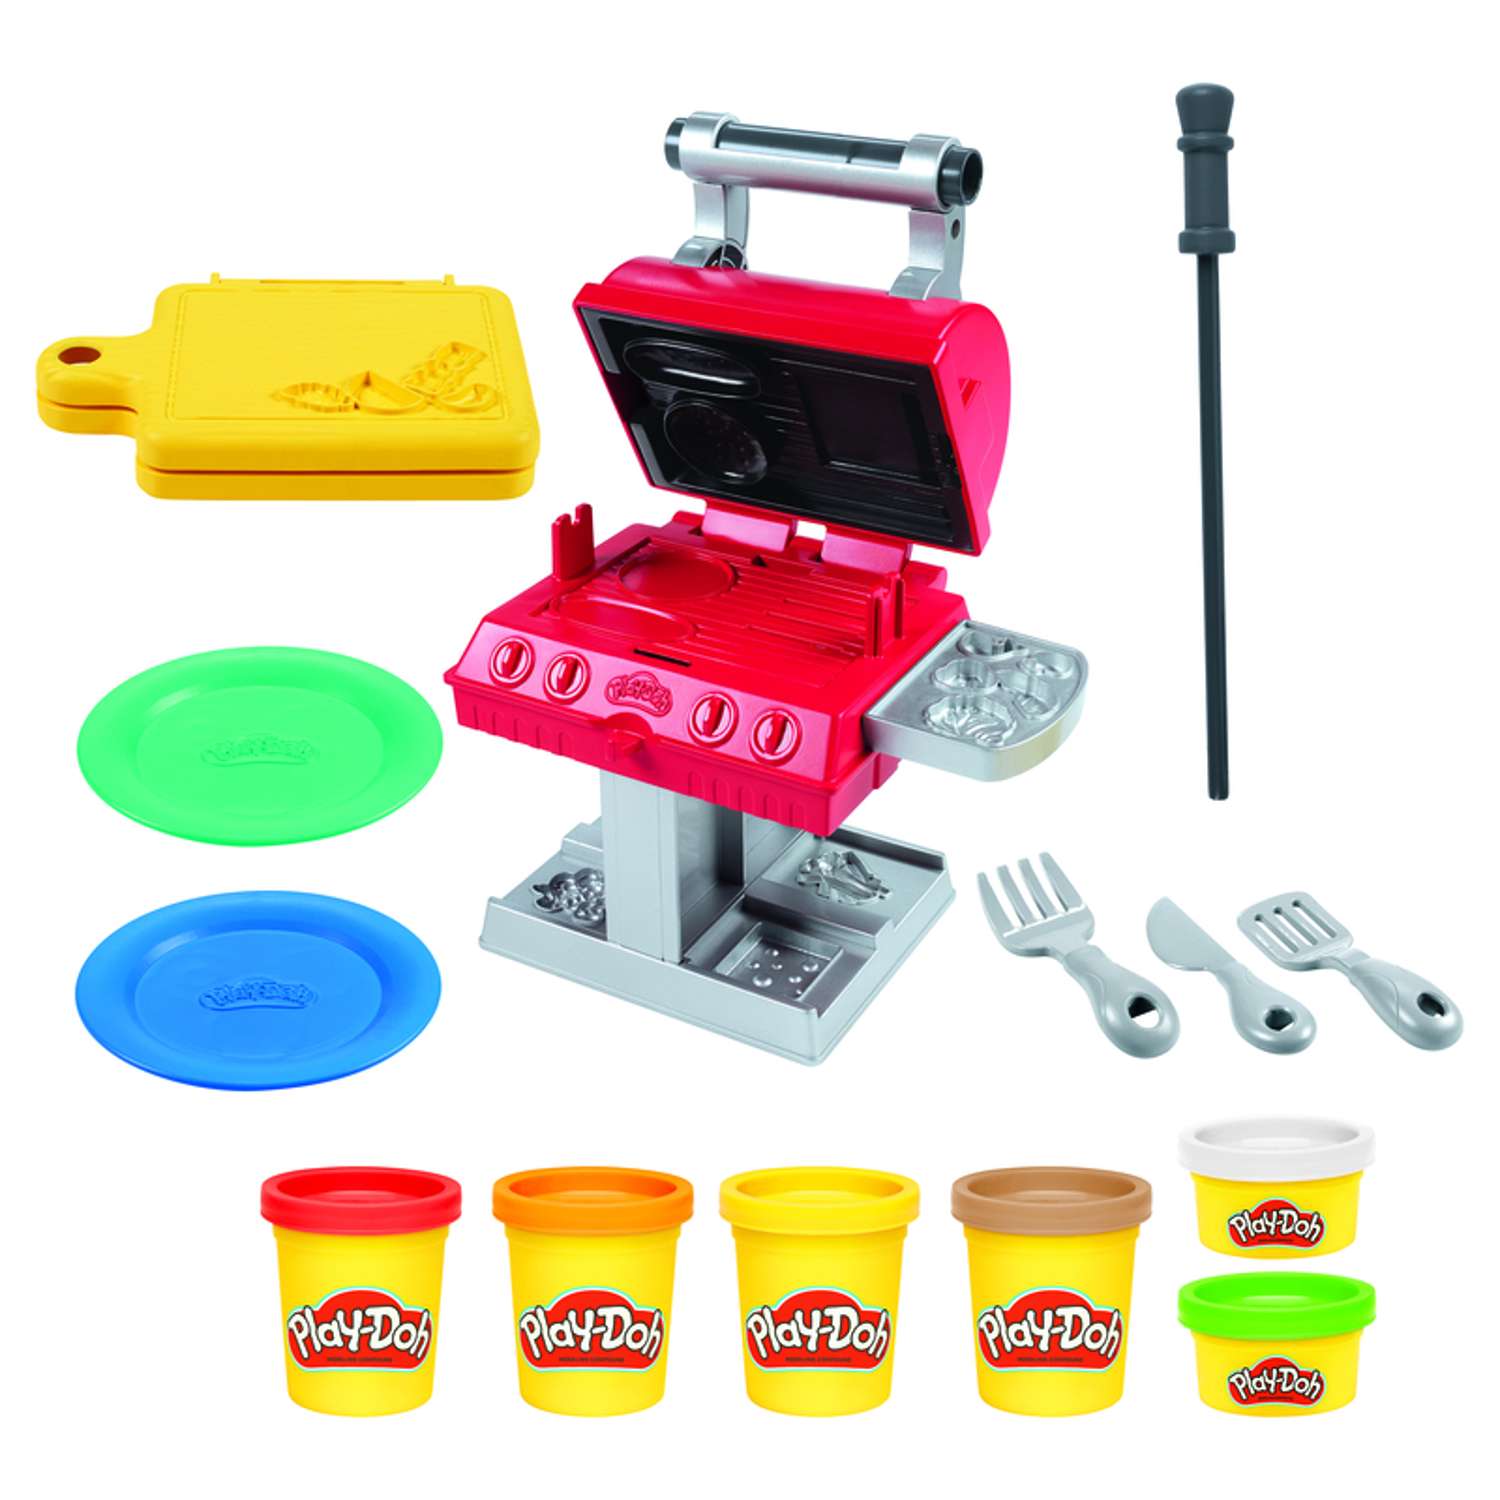 Play-Doh Kitchen Creations Pizza Oven Playset with 6 Cans of Modeling  Compound and 8 Accessories - Play-Doh